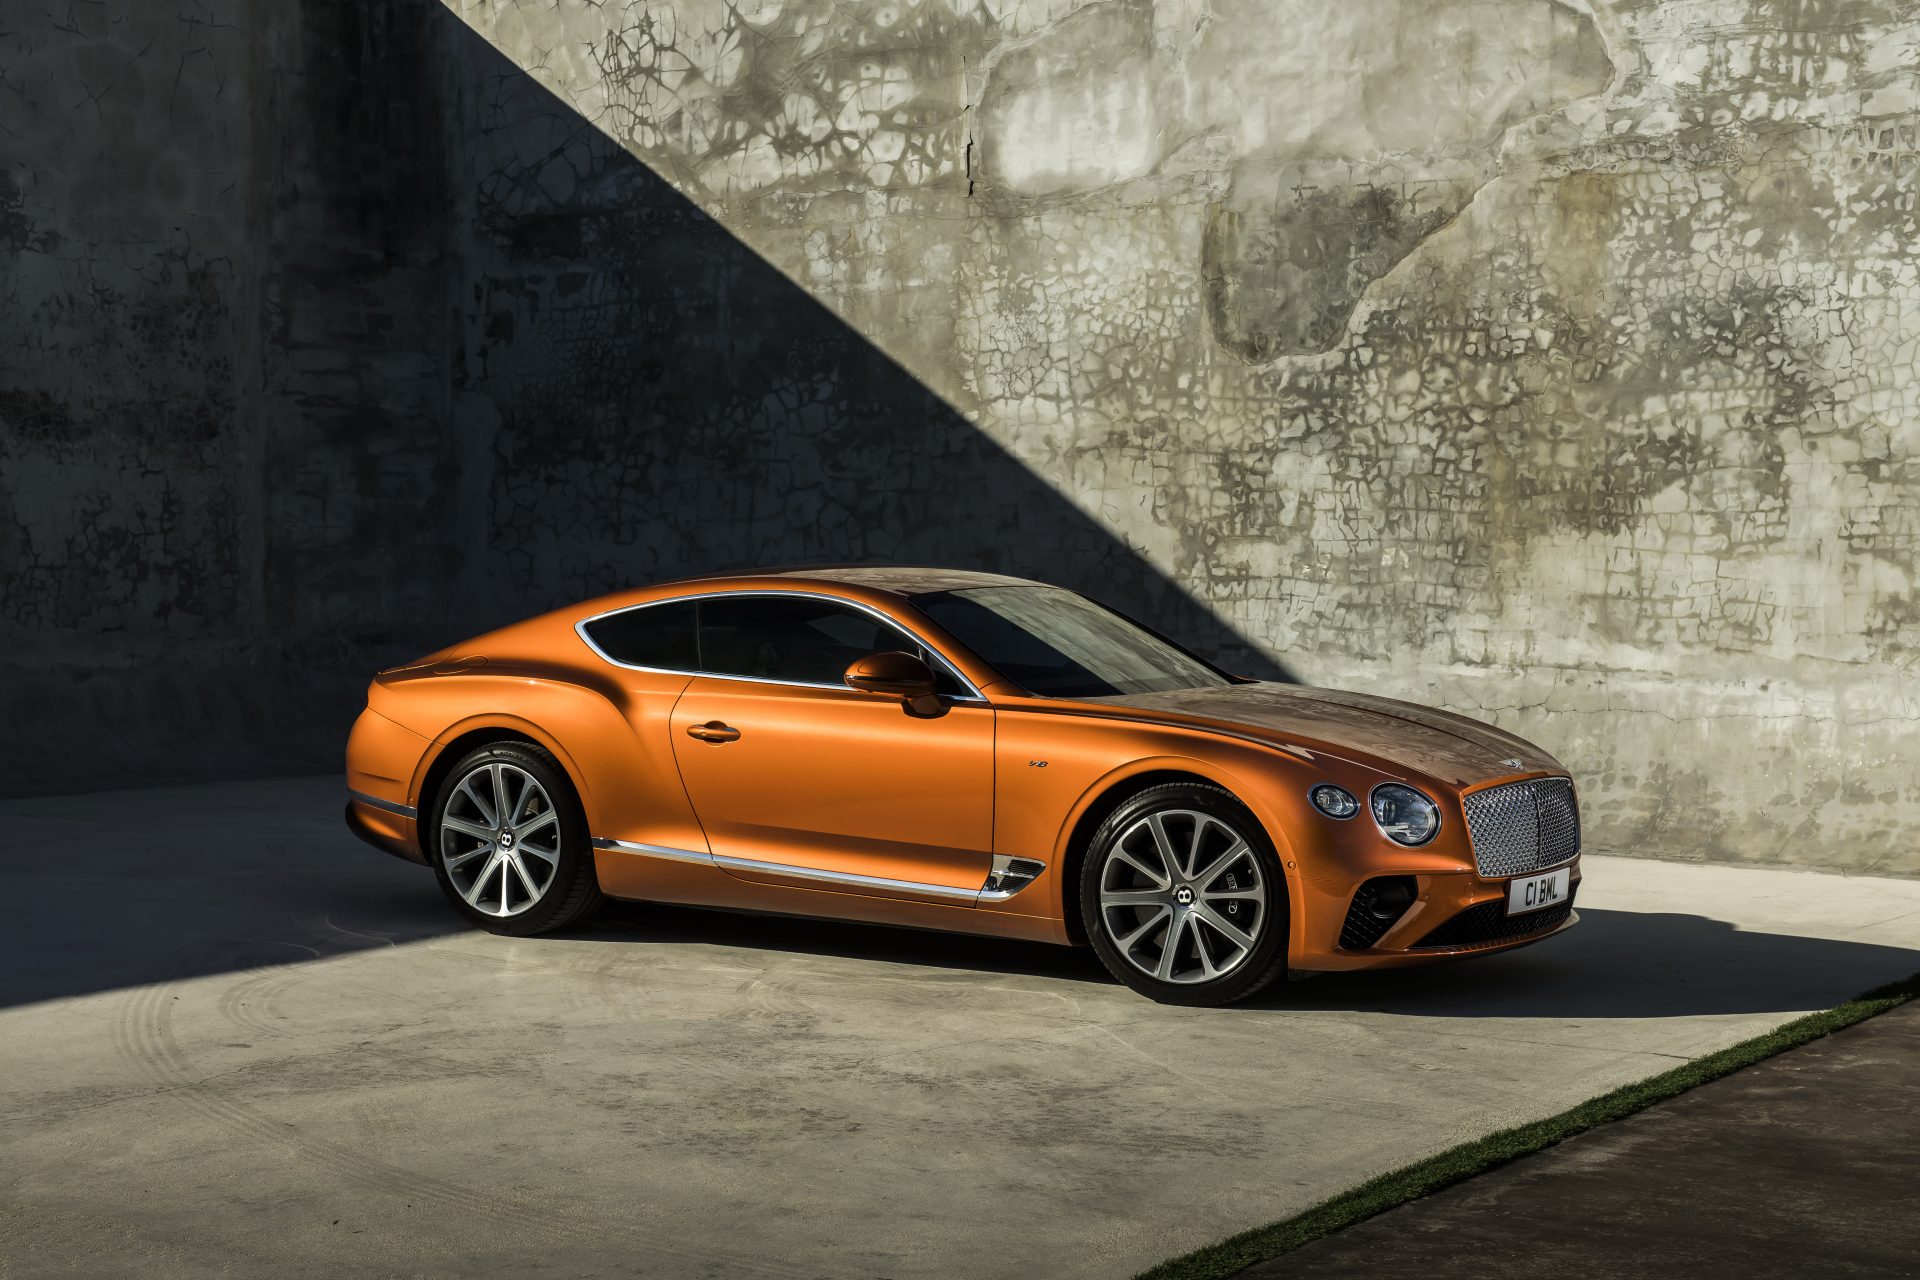 A Bentley Continental was the most expensive vehicle recovered by Vodafone Automotive during 2020.